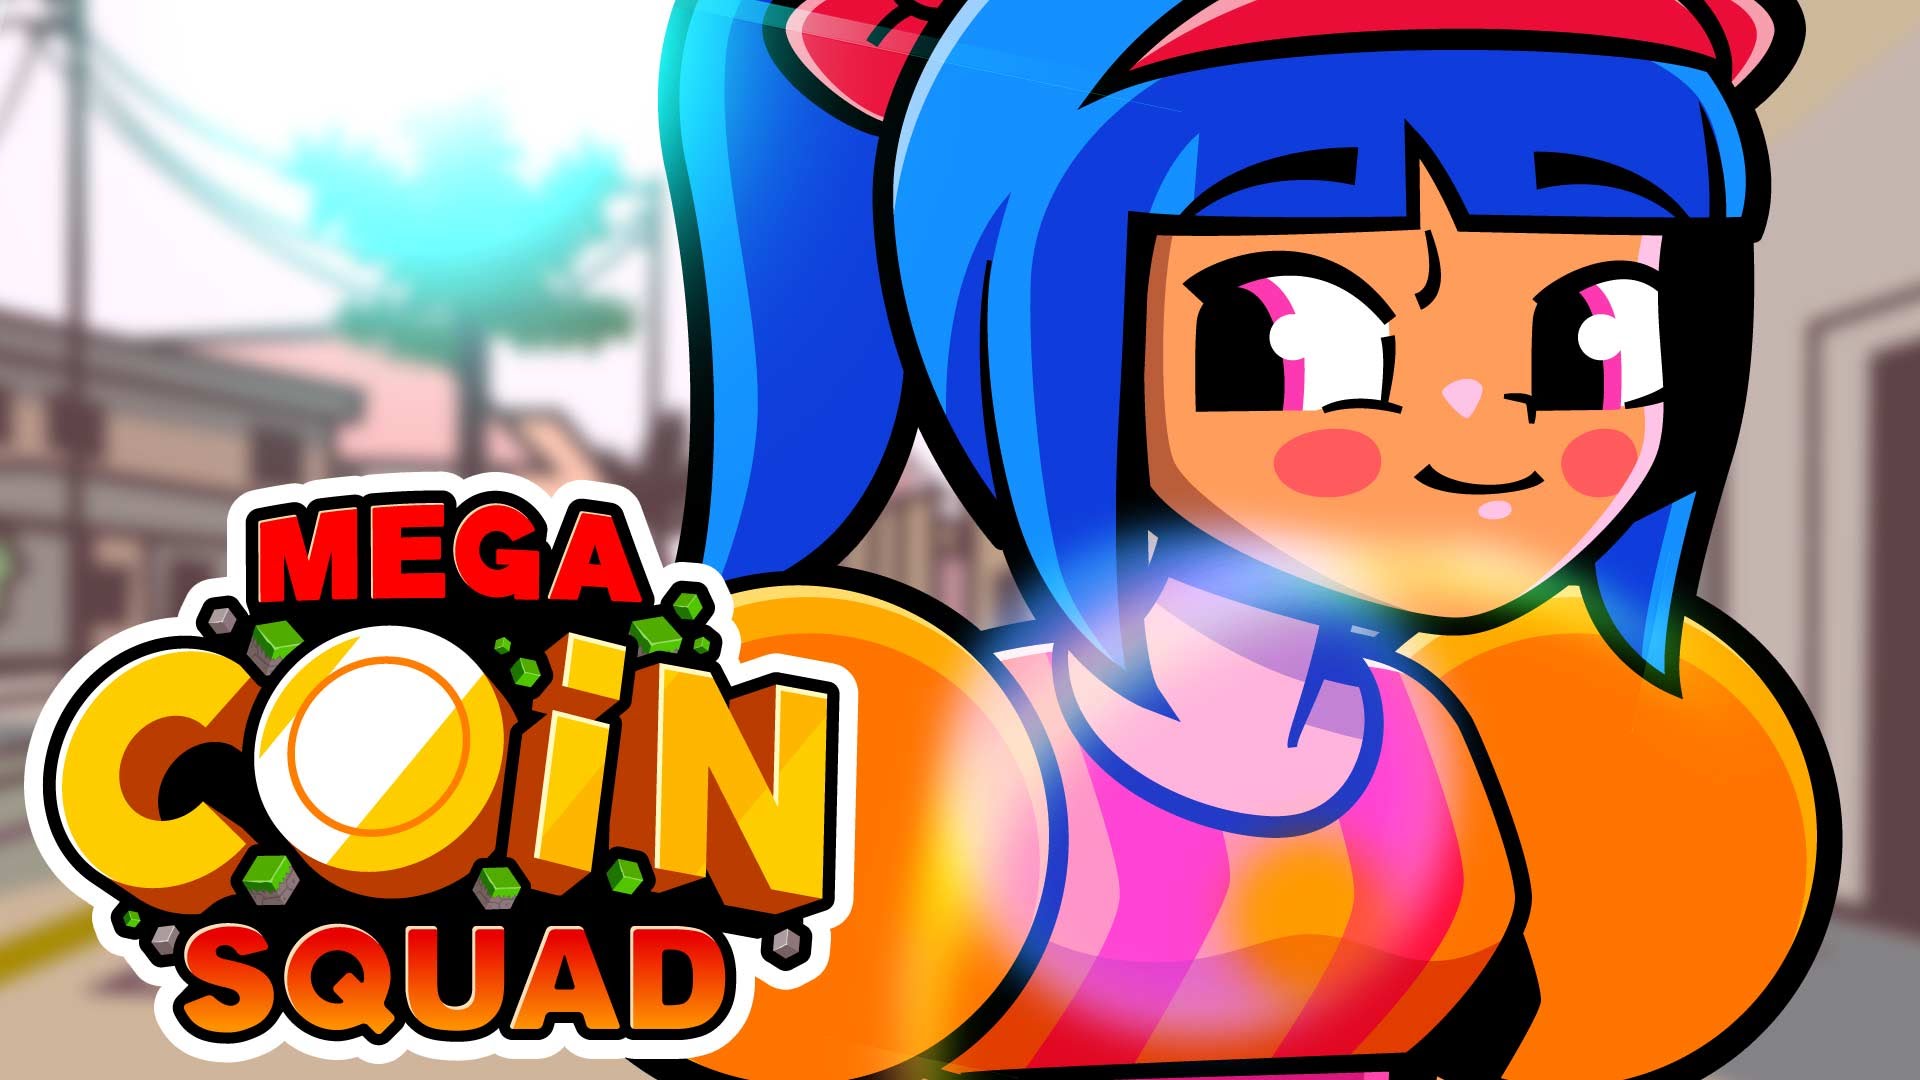 Amazing Mega Coin Squad Pictures & Backgrounds